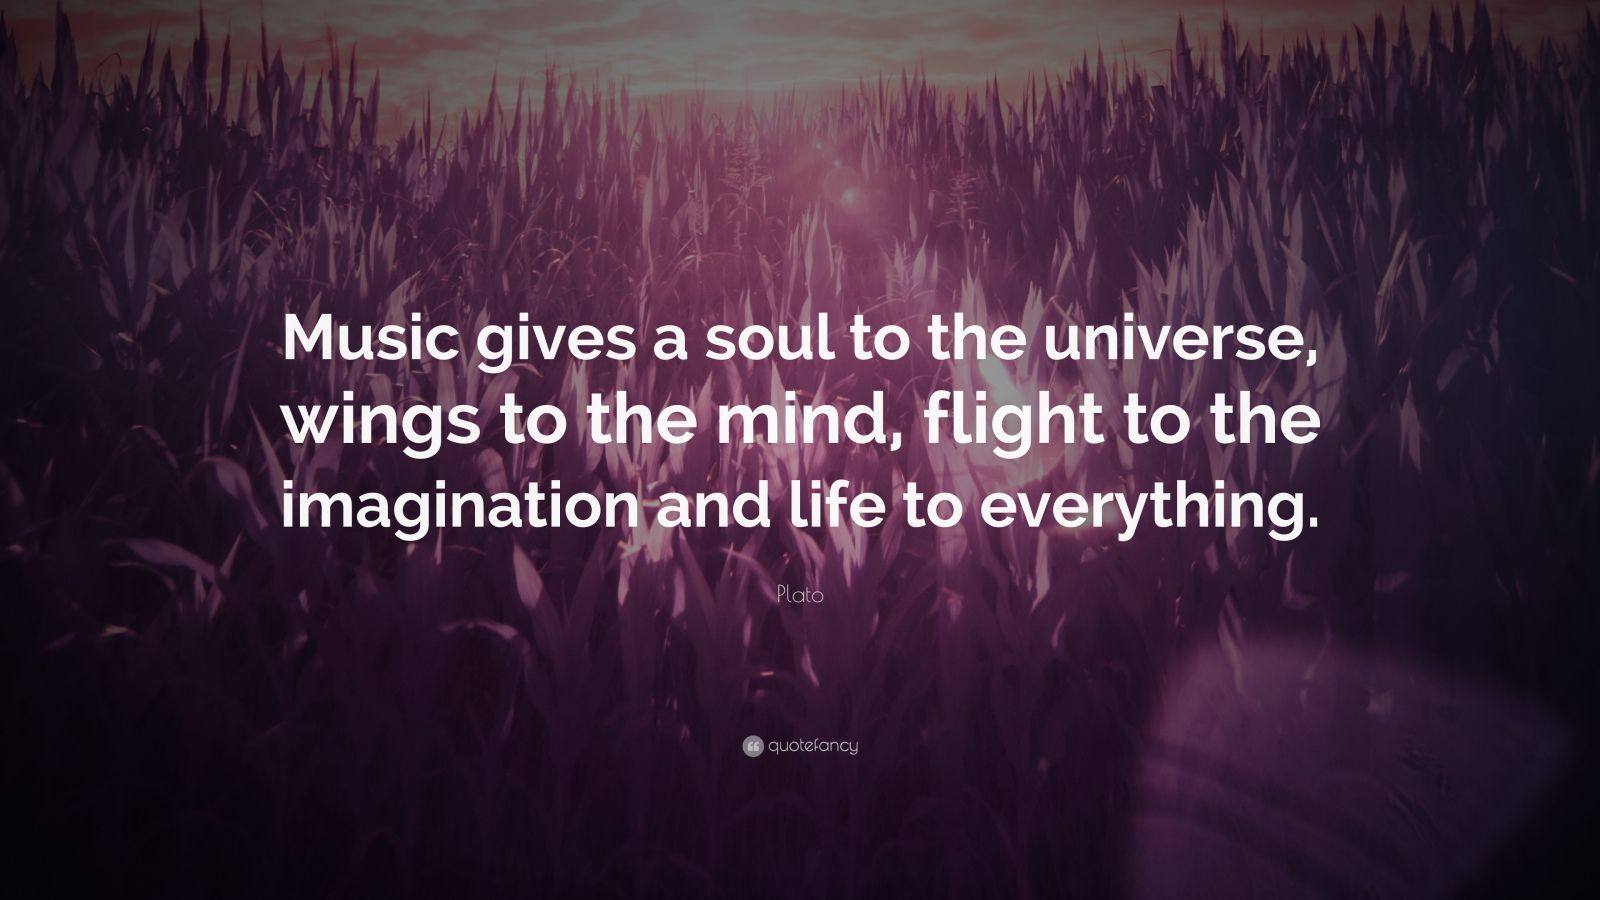 Plato Quote: “Music gives a soul to the universe, wings to the mind